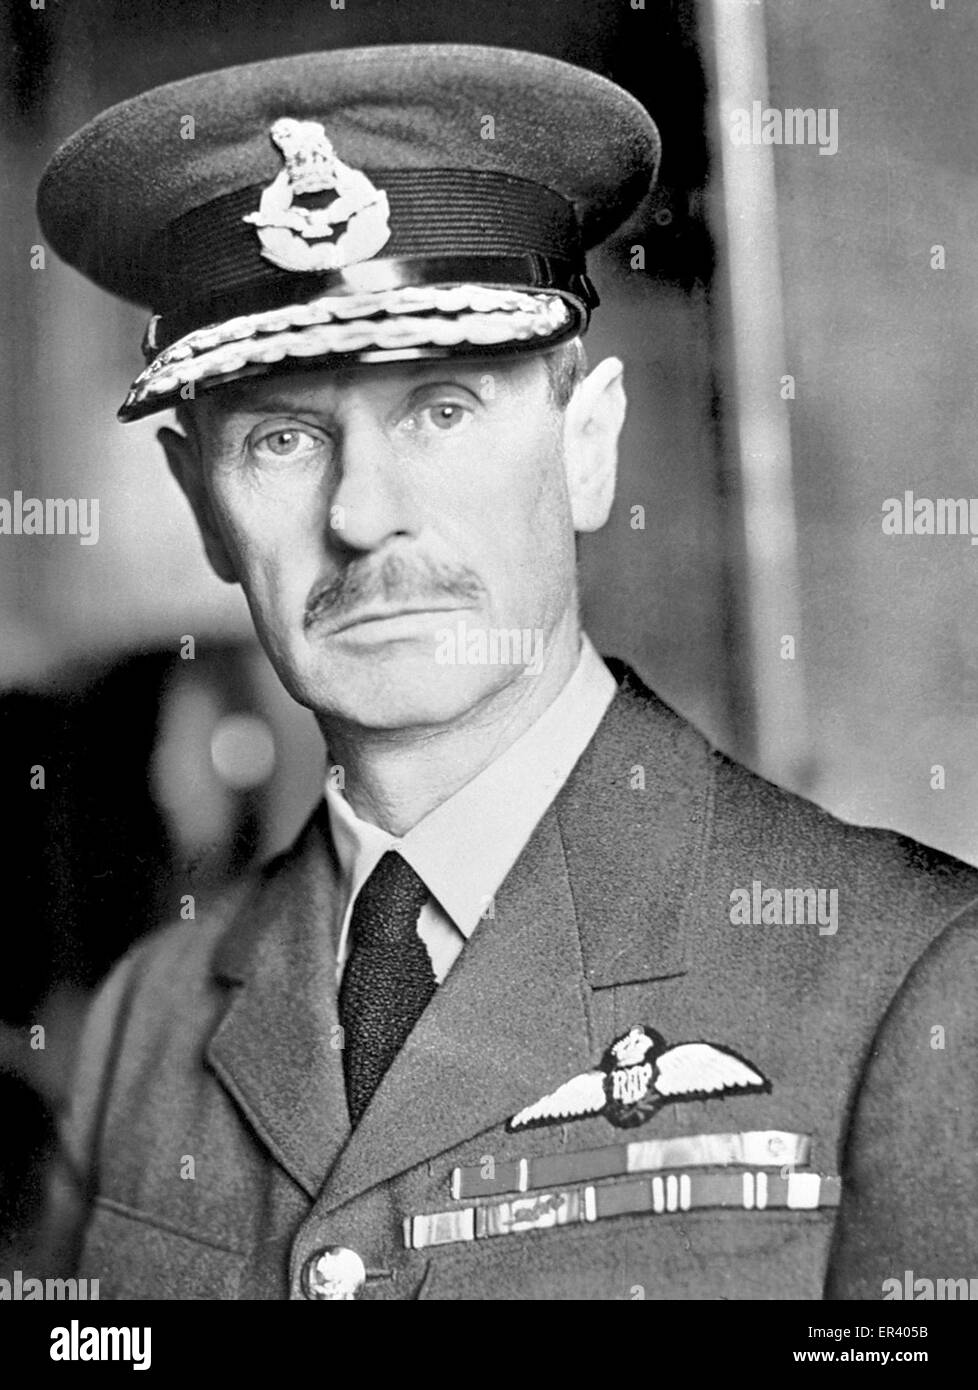 Oberbefehlshaber, Air Chief Marshal Sir Hugh Dowding. Air Chief Marshal Hugh Caswall Tremenheere Dowding, 1. Baron Dowding, britischer Offizier in der Royal Air Force. Stockfoto